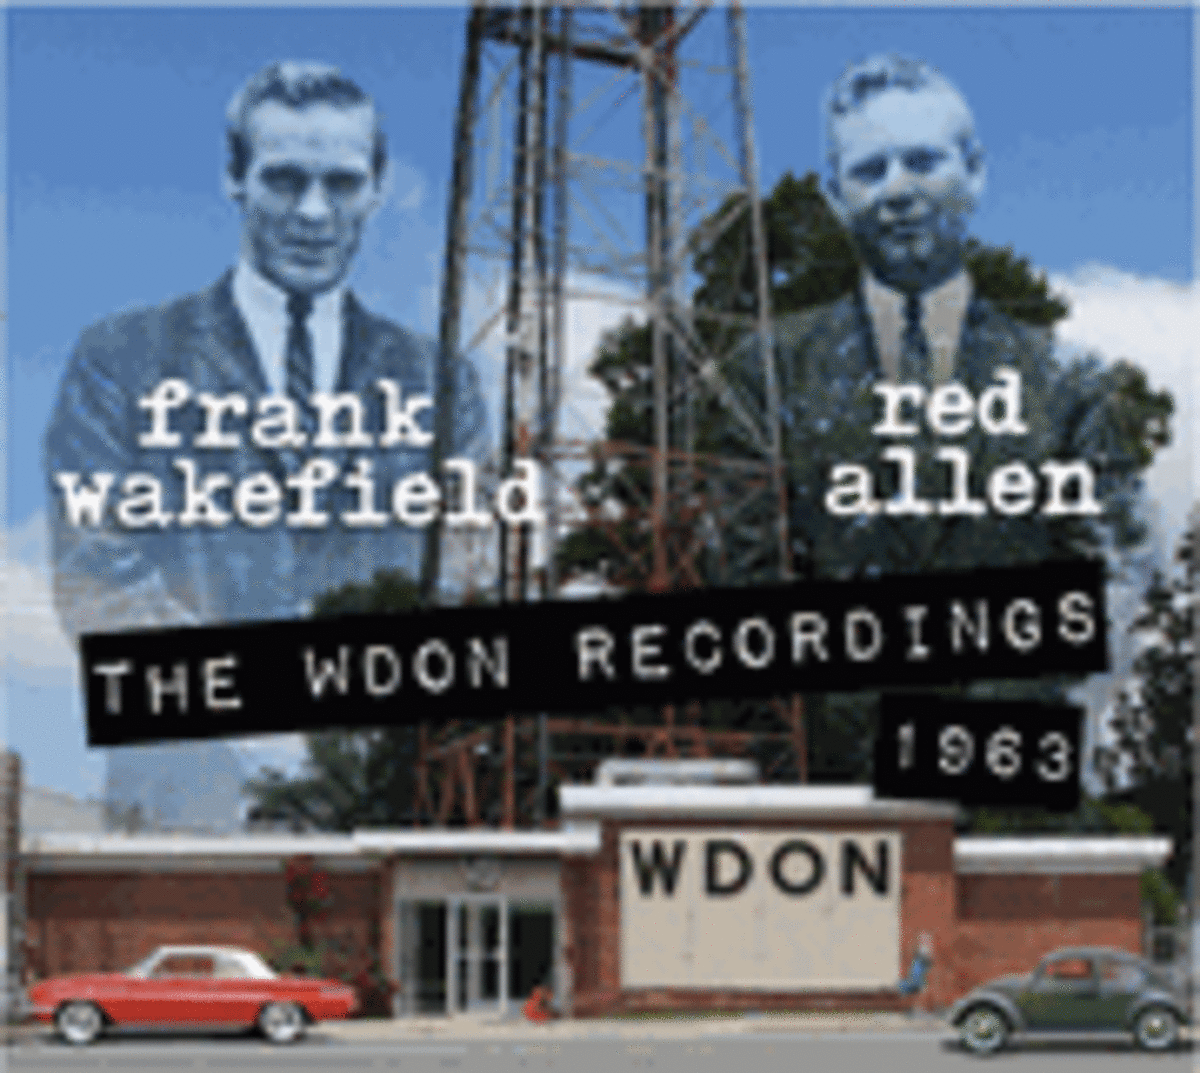 cd-258-red-allen-frank-wakefield-the-wdon-recordings-1963-2